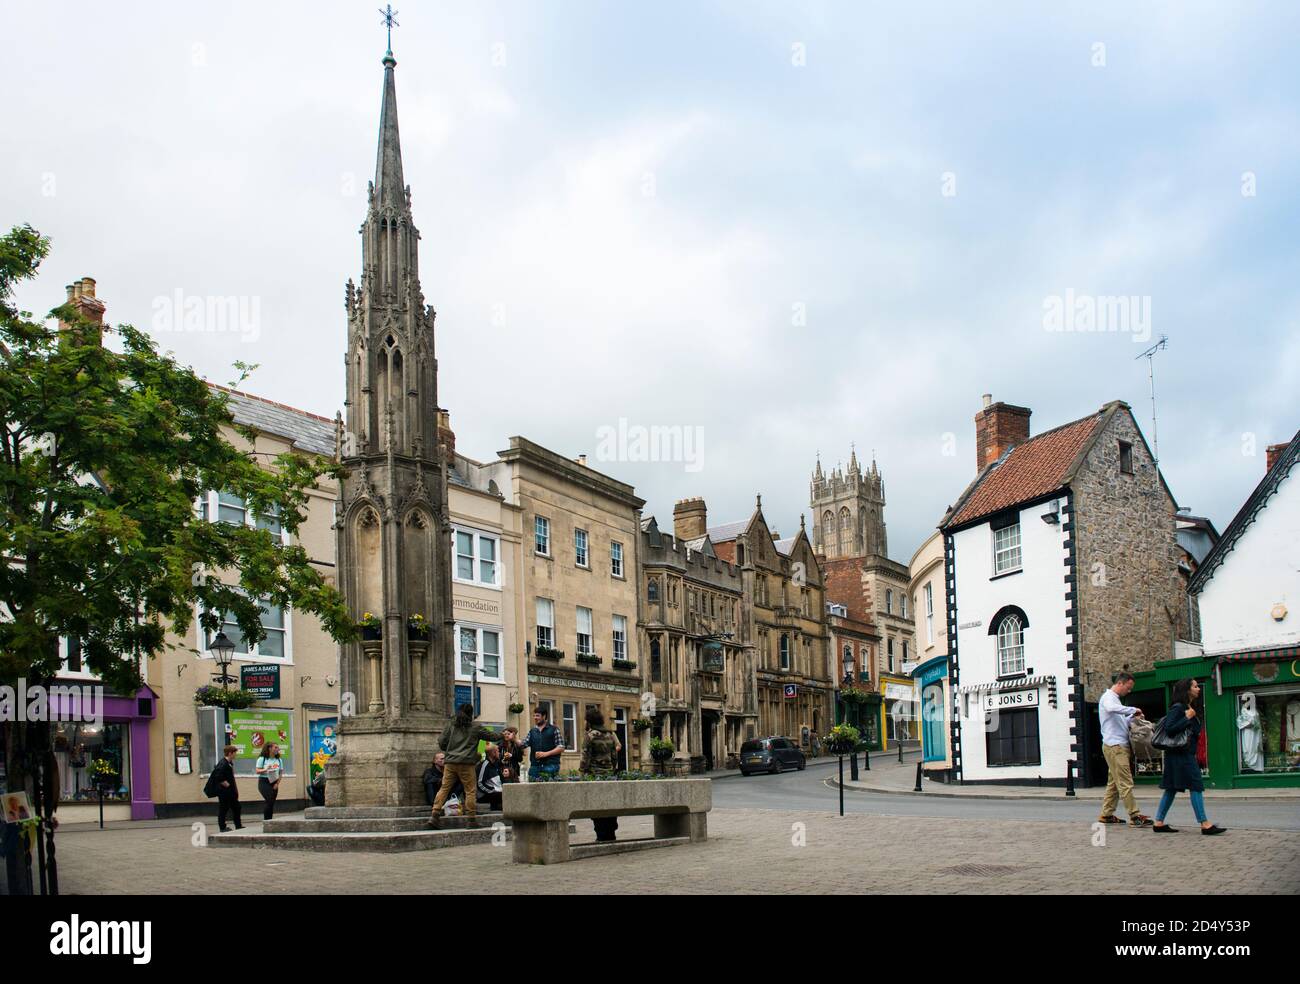 Glastonbury Town Center and fully restored Market Cross. Crowds milling with two young men  fist bumping a greeting. Local stores visible. Stock Photo